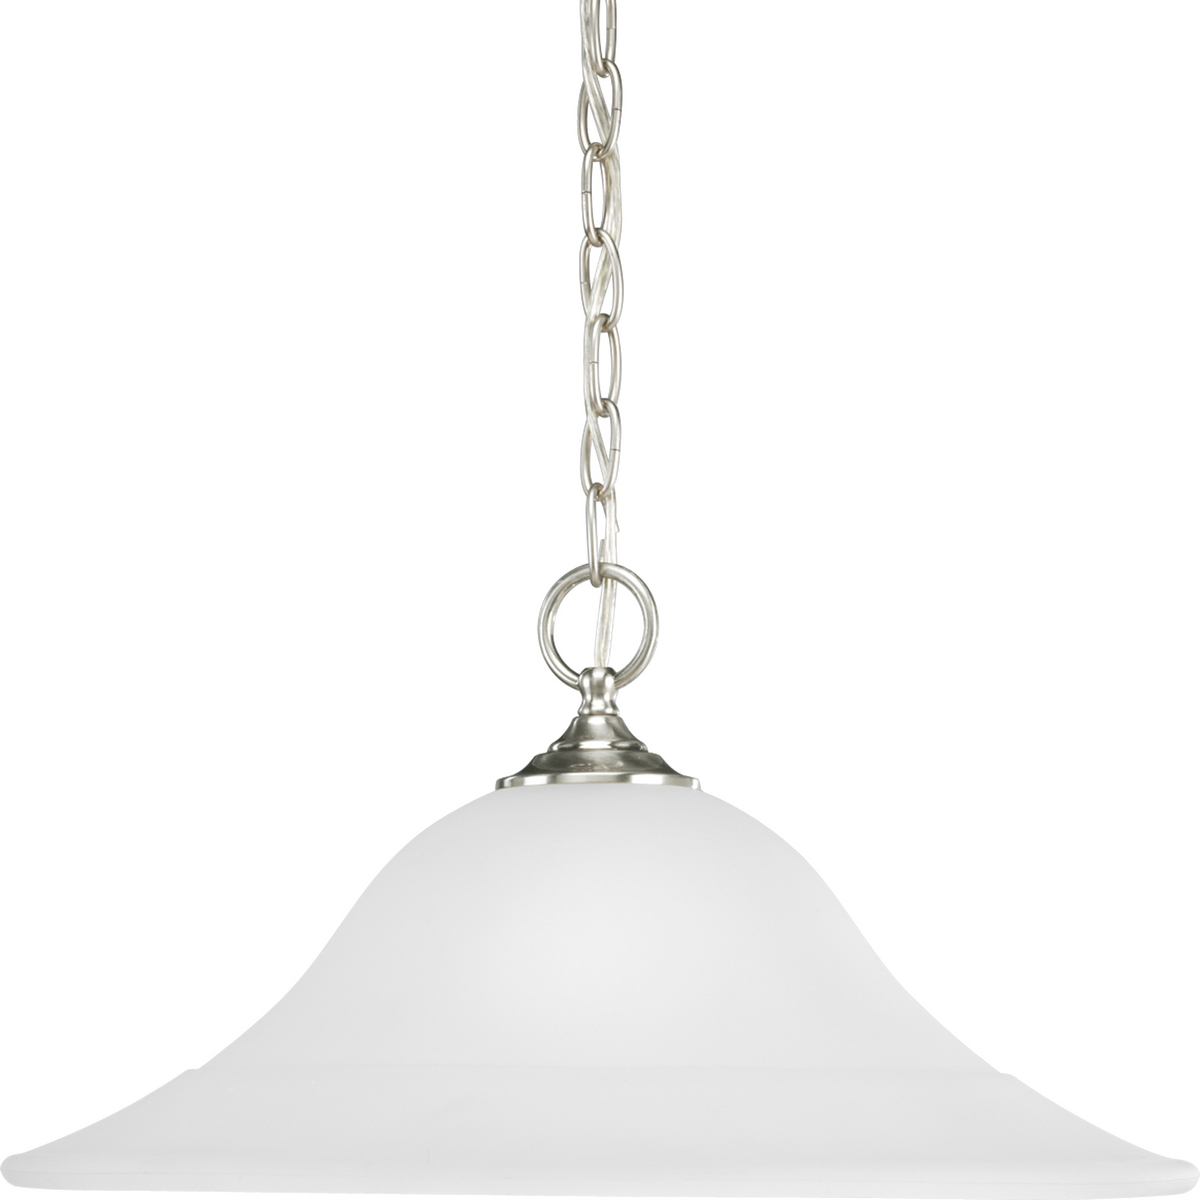 One-light pendant featuring soft angles, curving lines and etched glass shades. Gracefully exotic, the Trinity Collection offers classic sophistication for transitional interiors. Sculptural forms of metal and glass are enhanced by a classic finish. This transitional style can transform a room or your whole home with its charming versatility. Brushed Nickel finish.